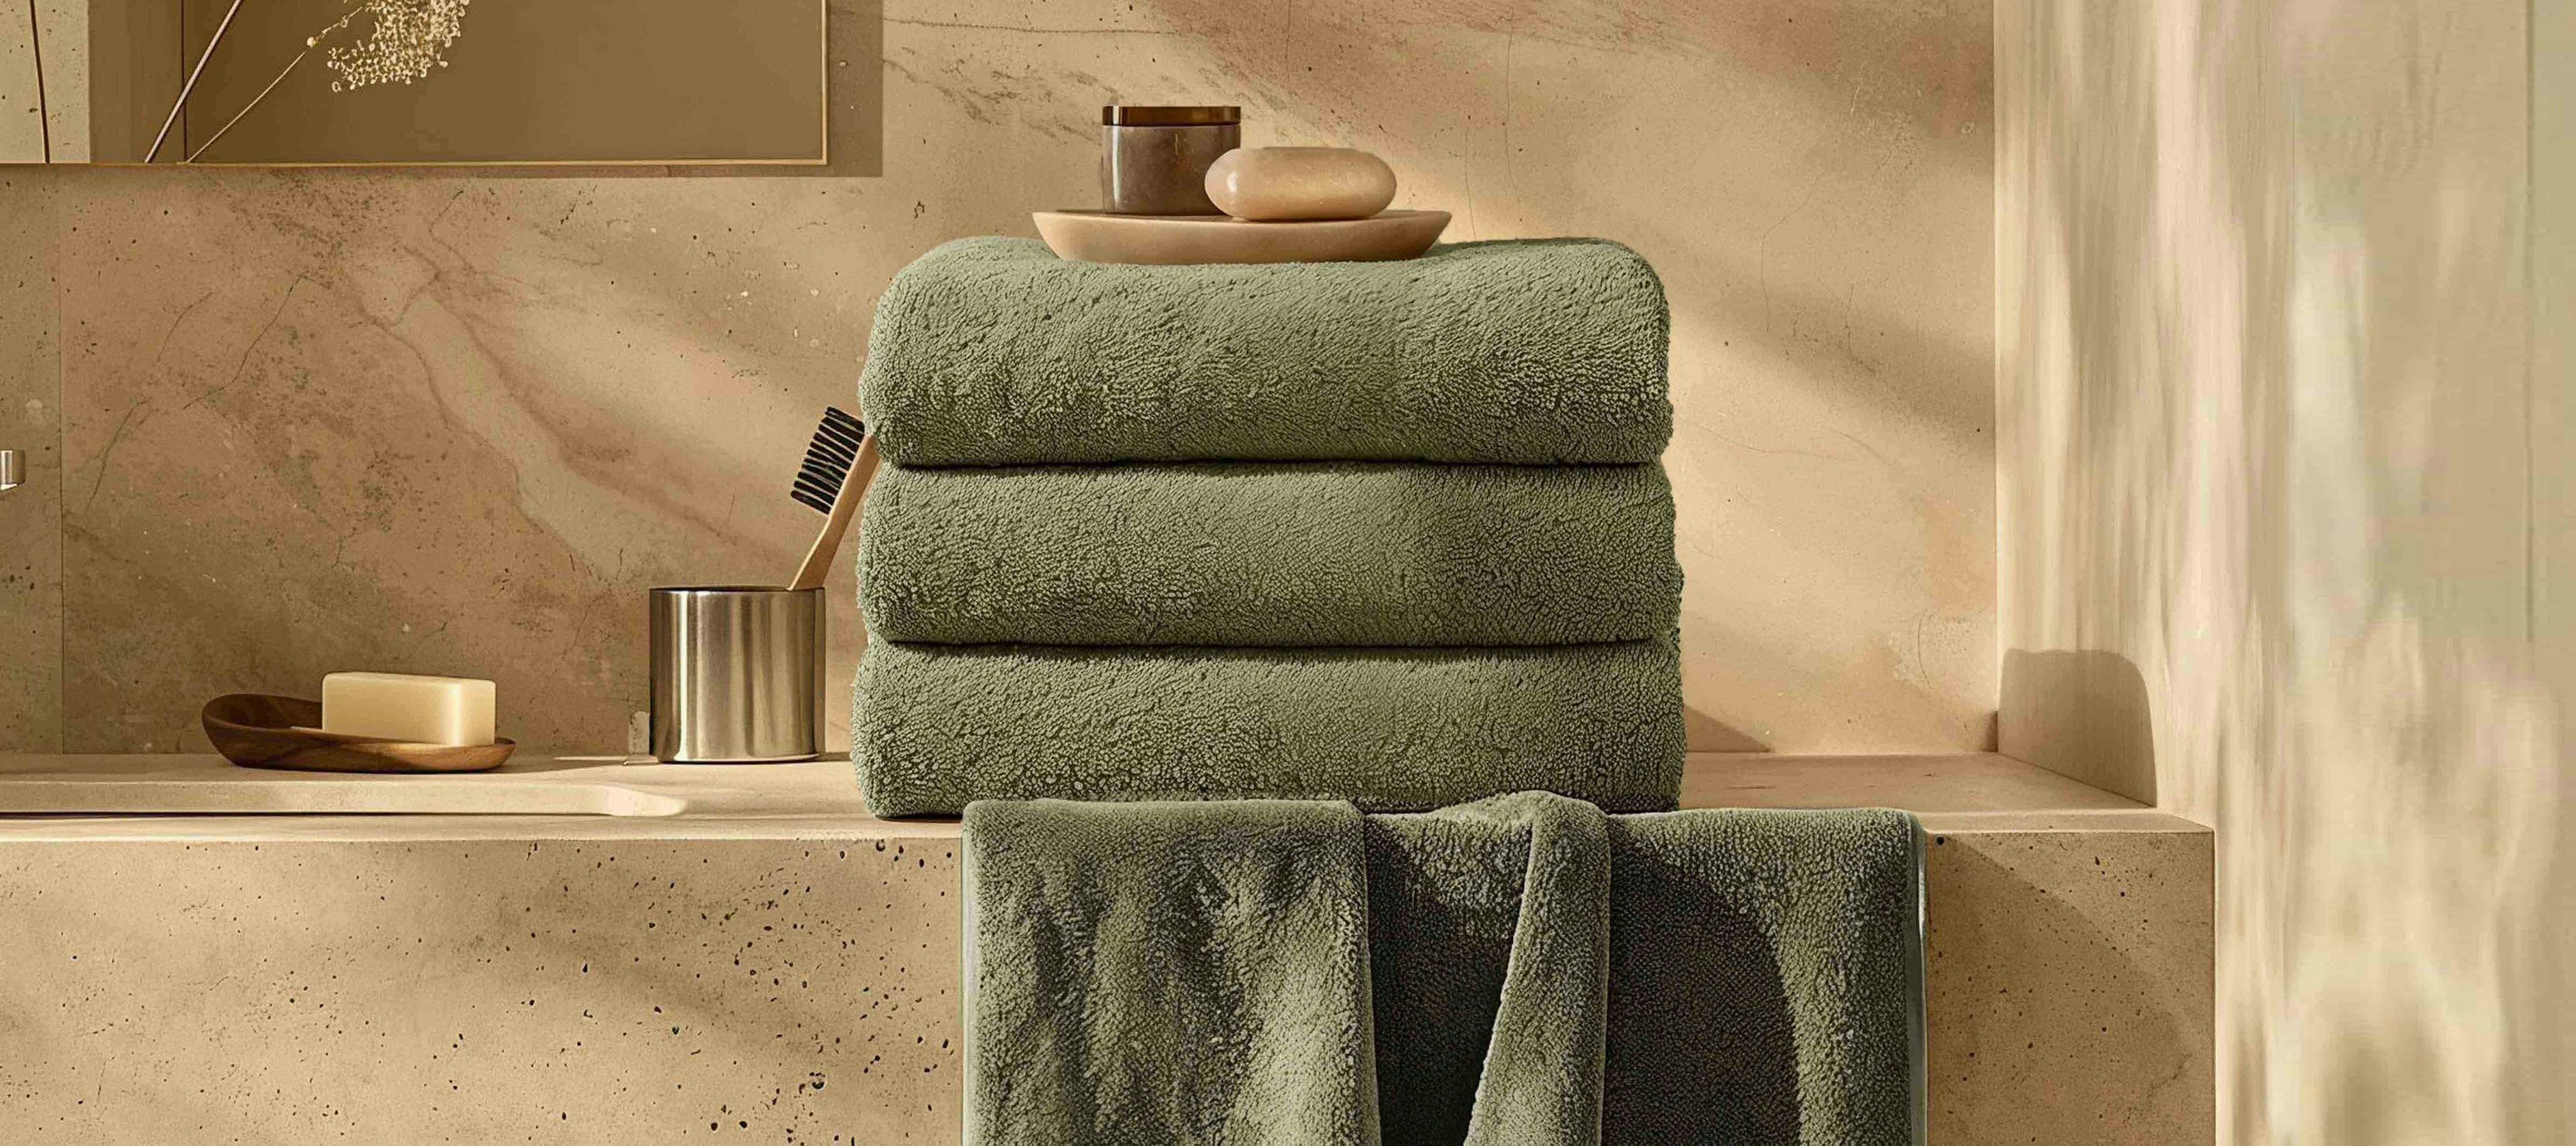 Ultraplush towels in Moss color